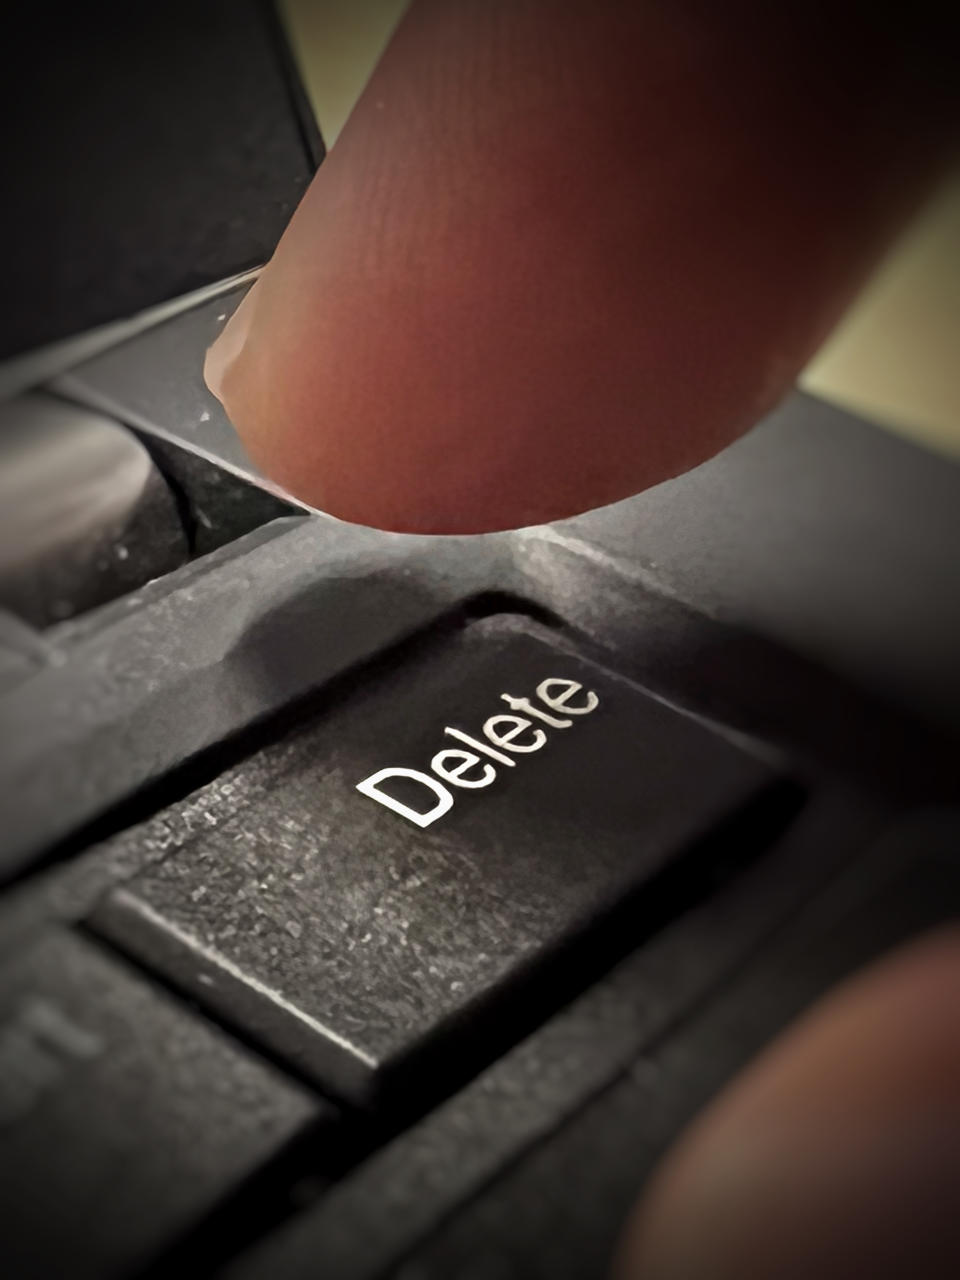 Close-up of a finger above a keyboard's delete key